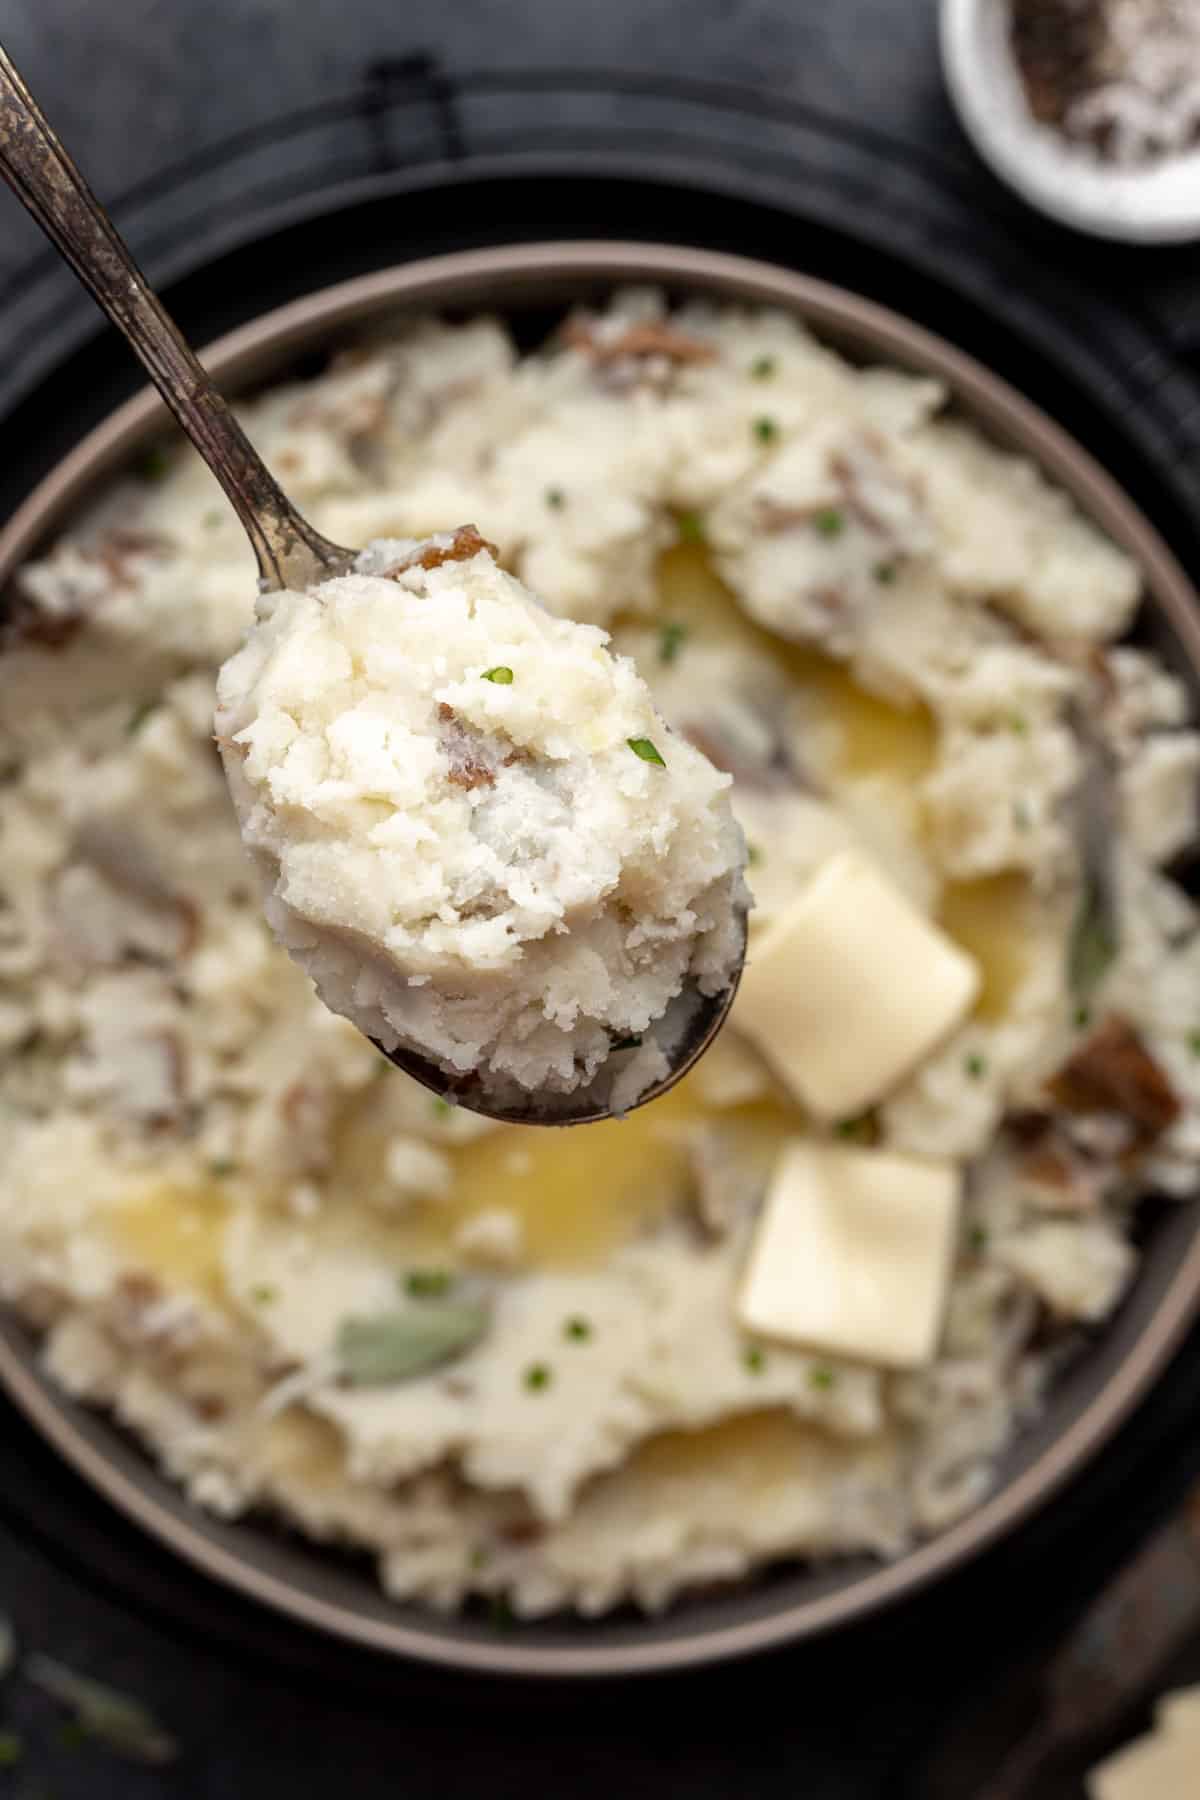 A spoonful of fluffy mashed potatoes over a serving bowl filled with potatoes and melted butter..